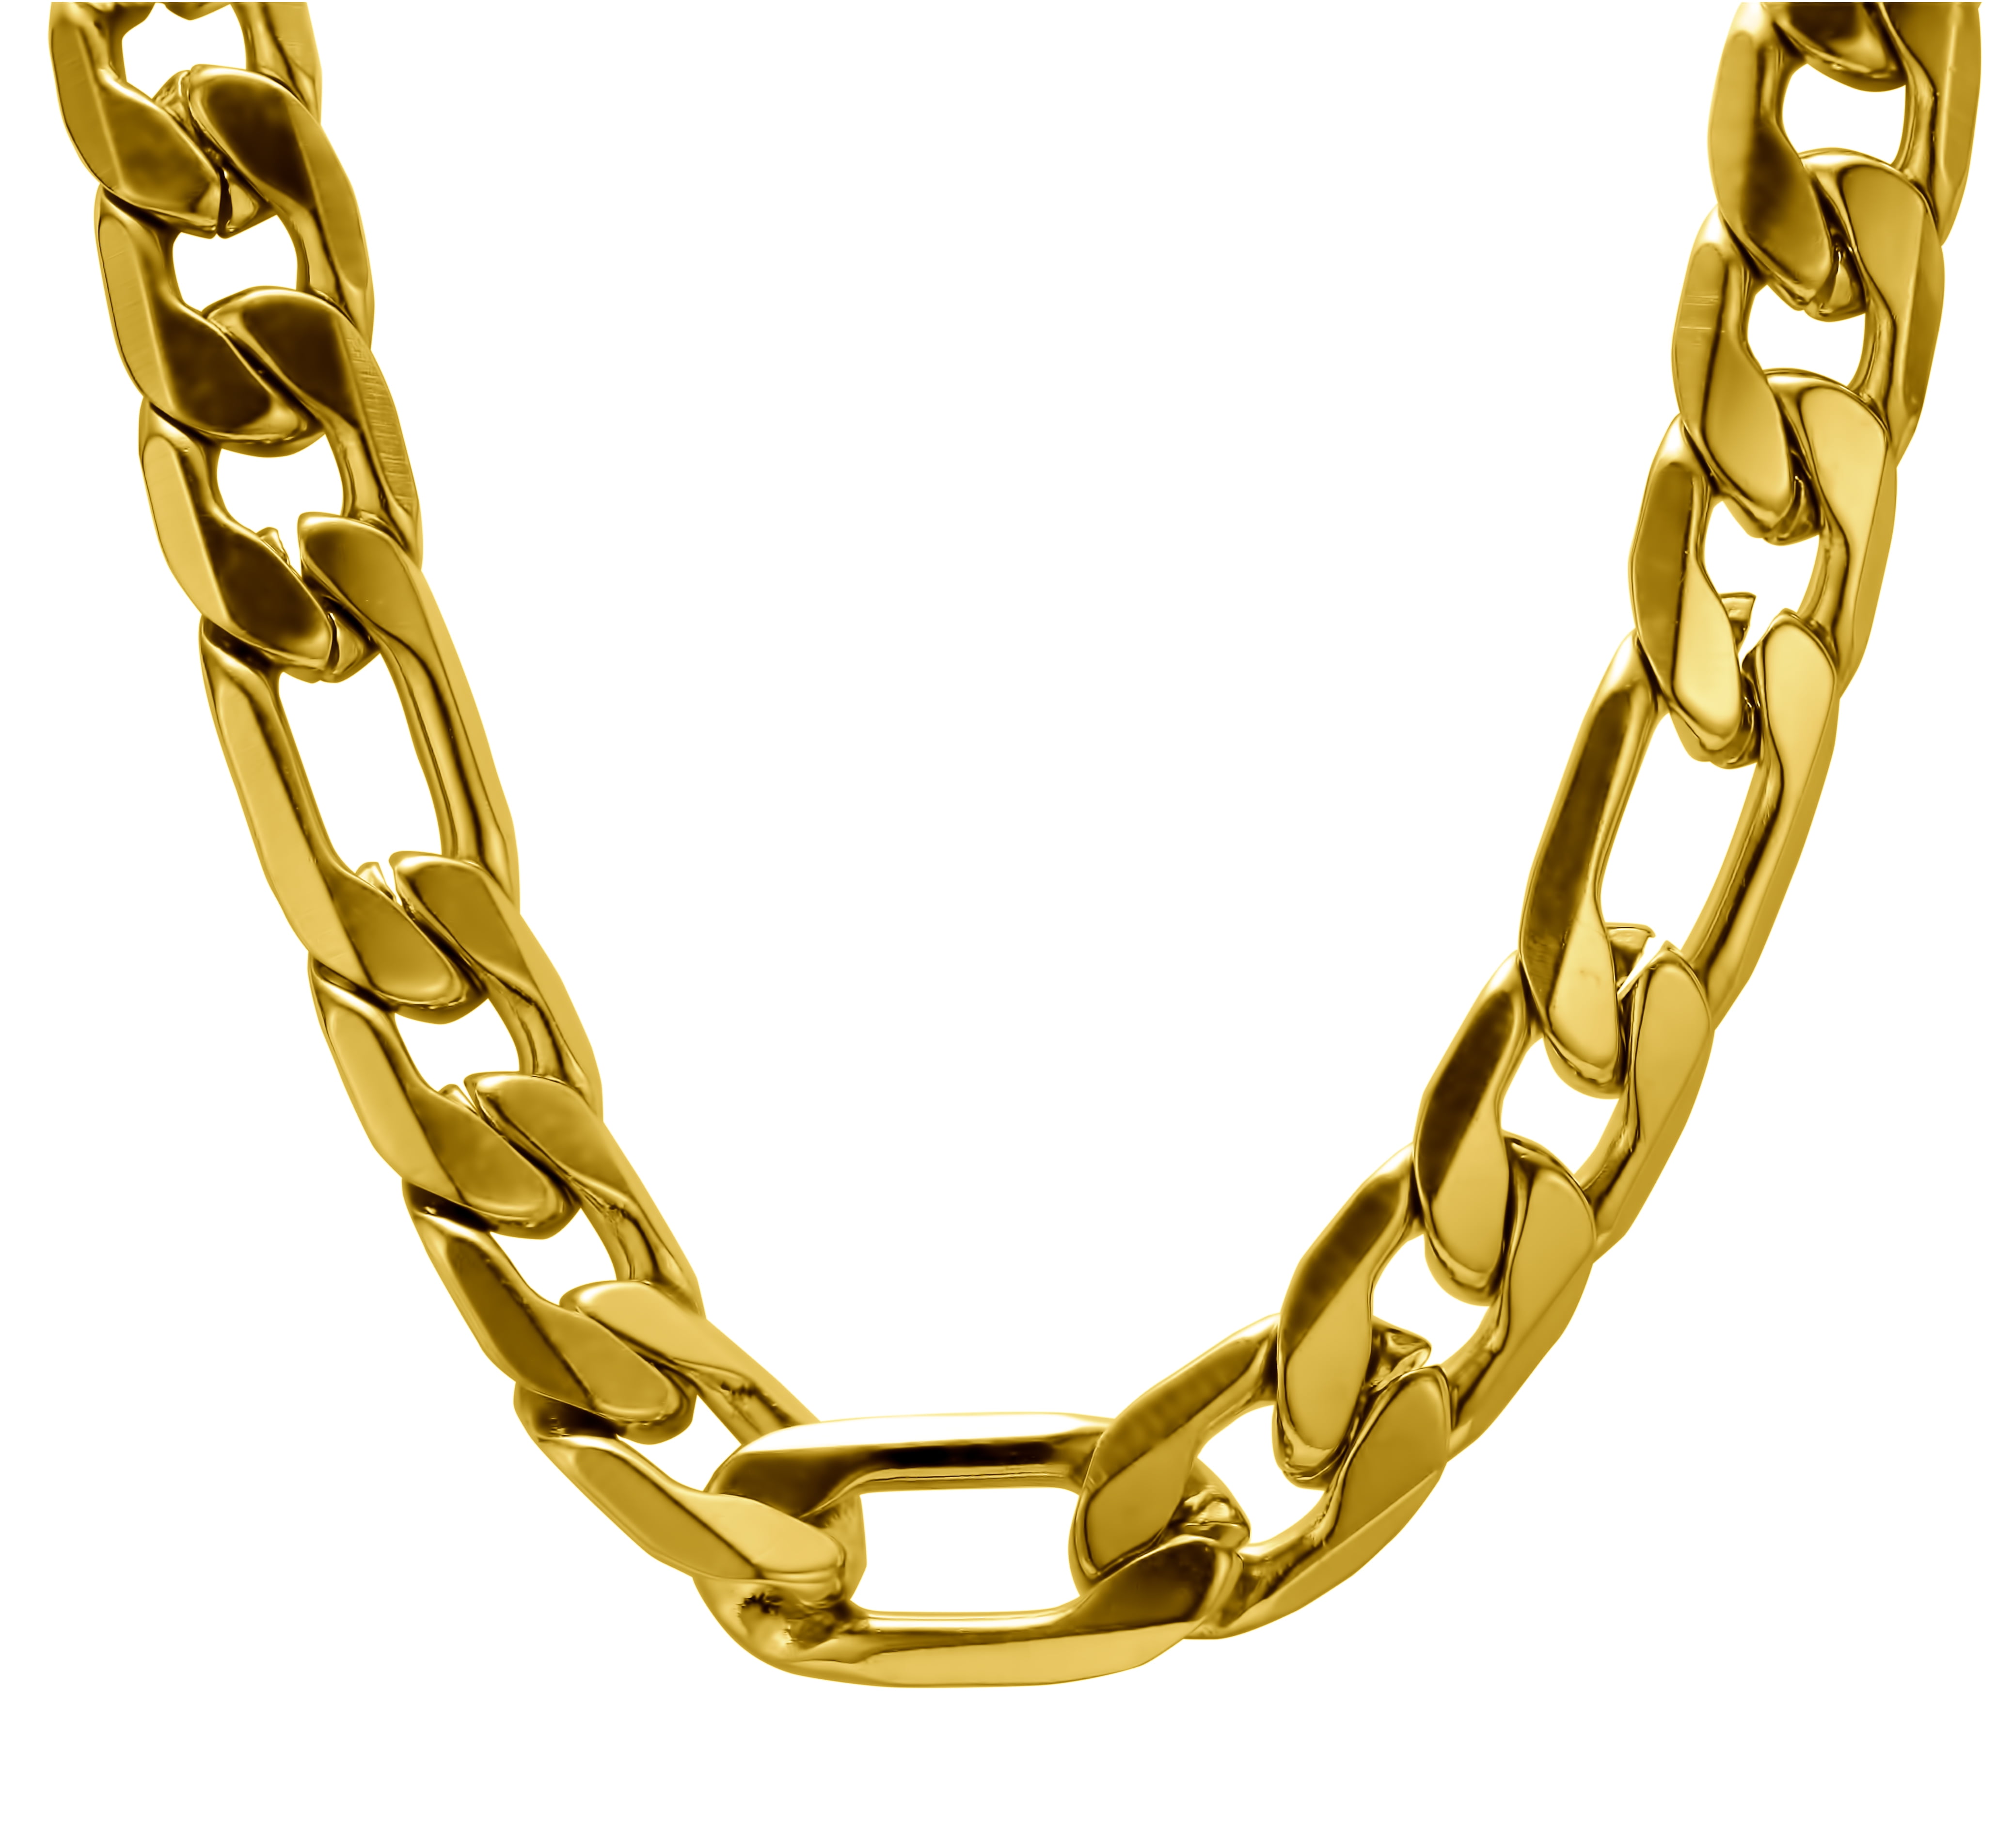 Top 91+ Pictures Images Of Gold Chains Completed